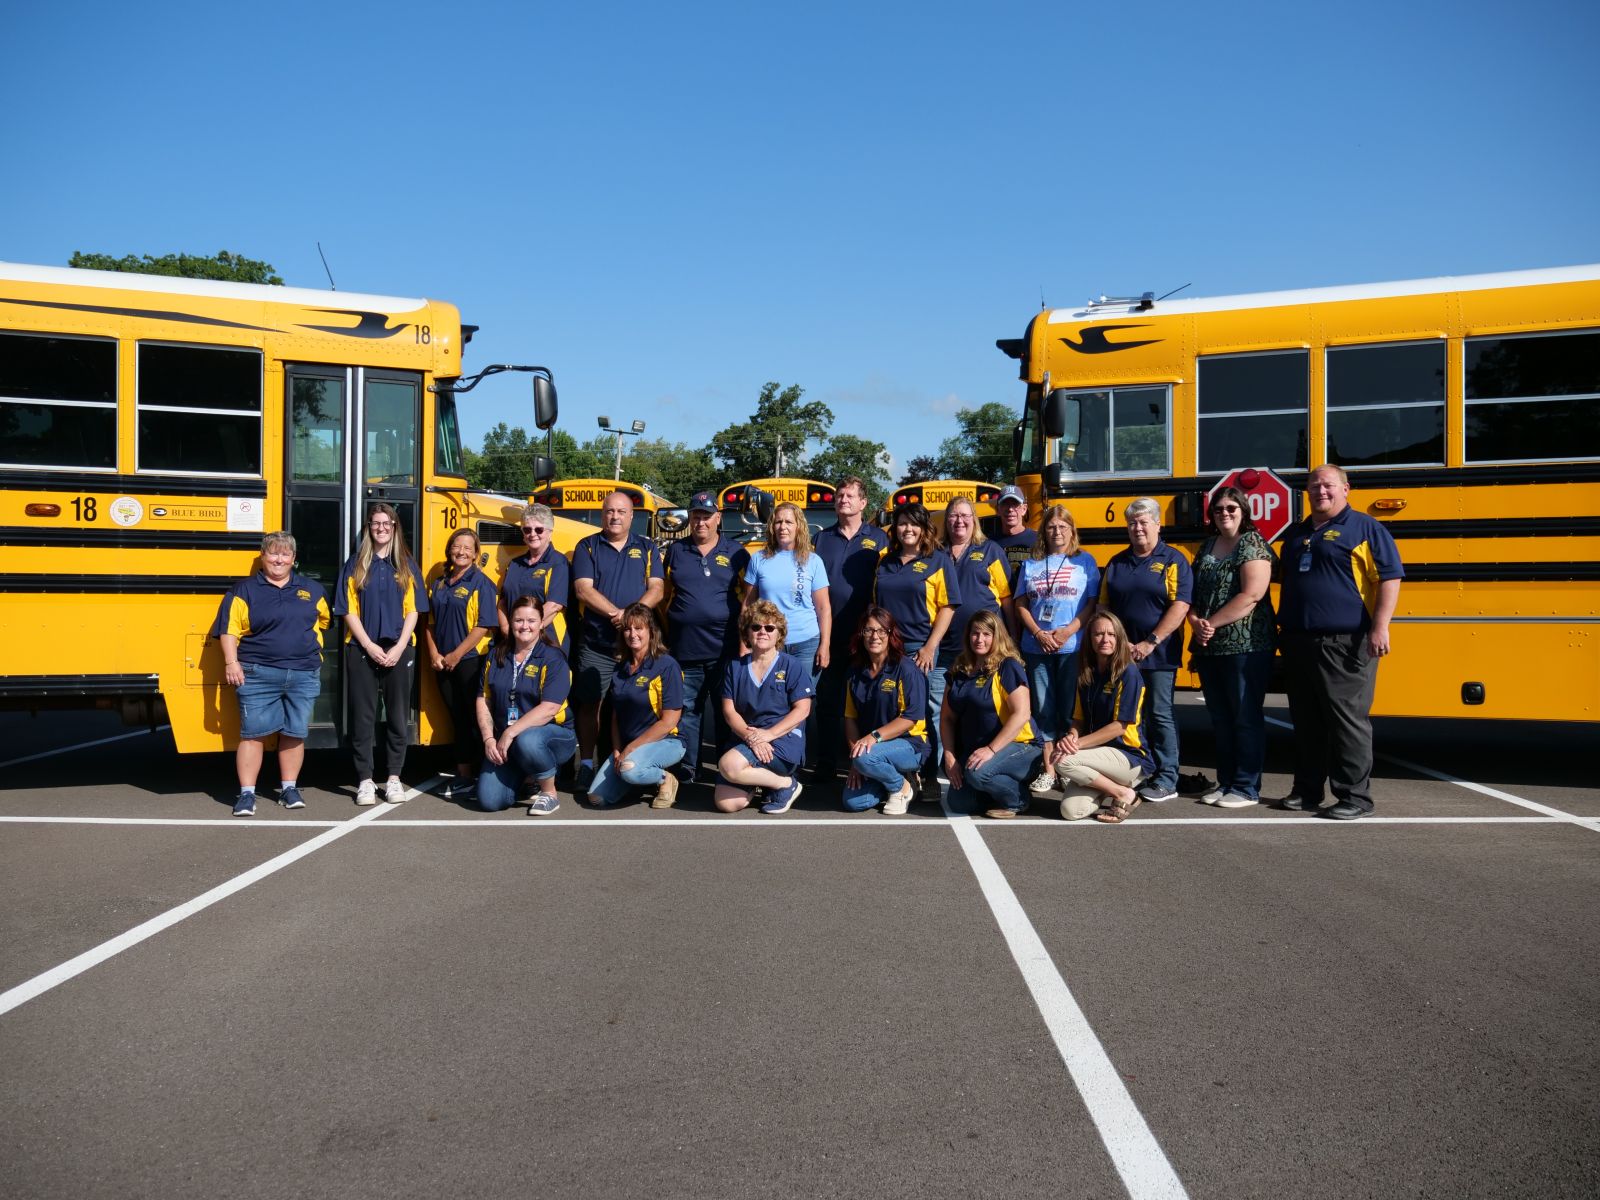 An image of a group of people in front of two buses nose-to-nose.